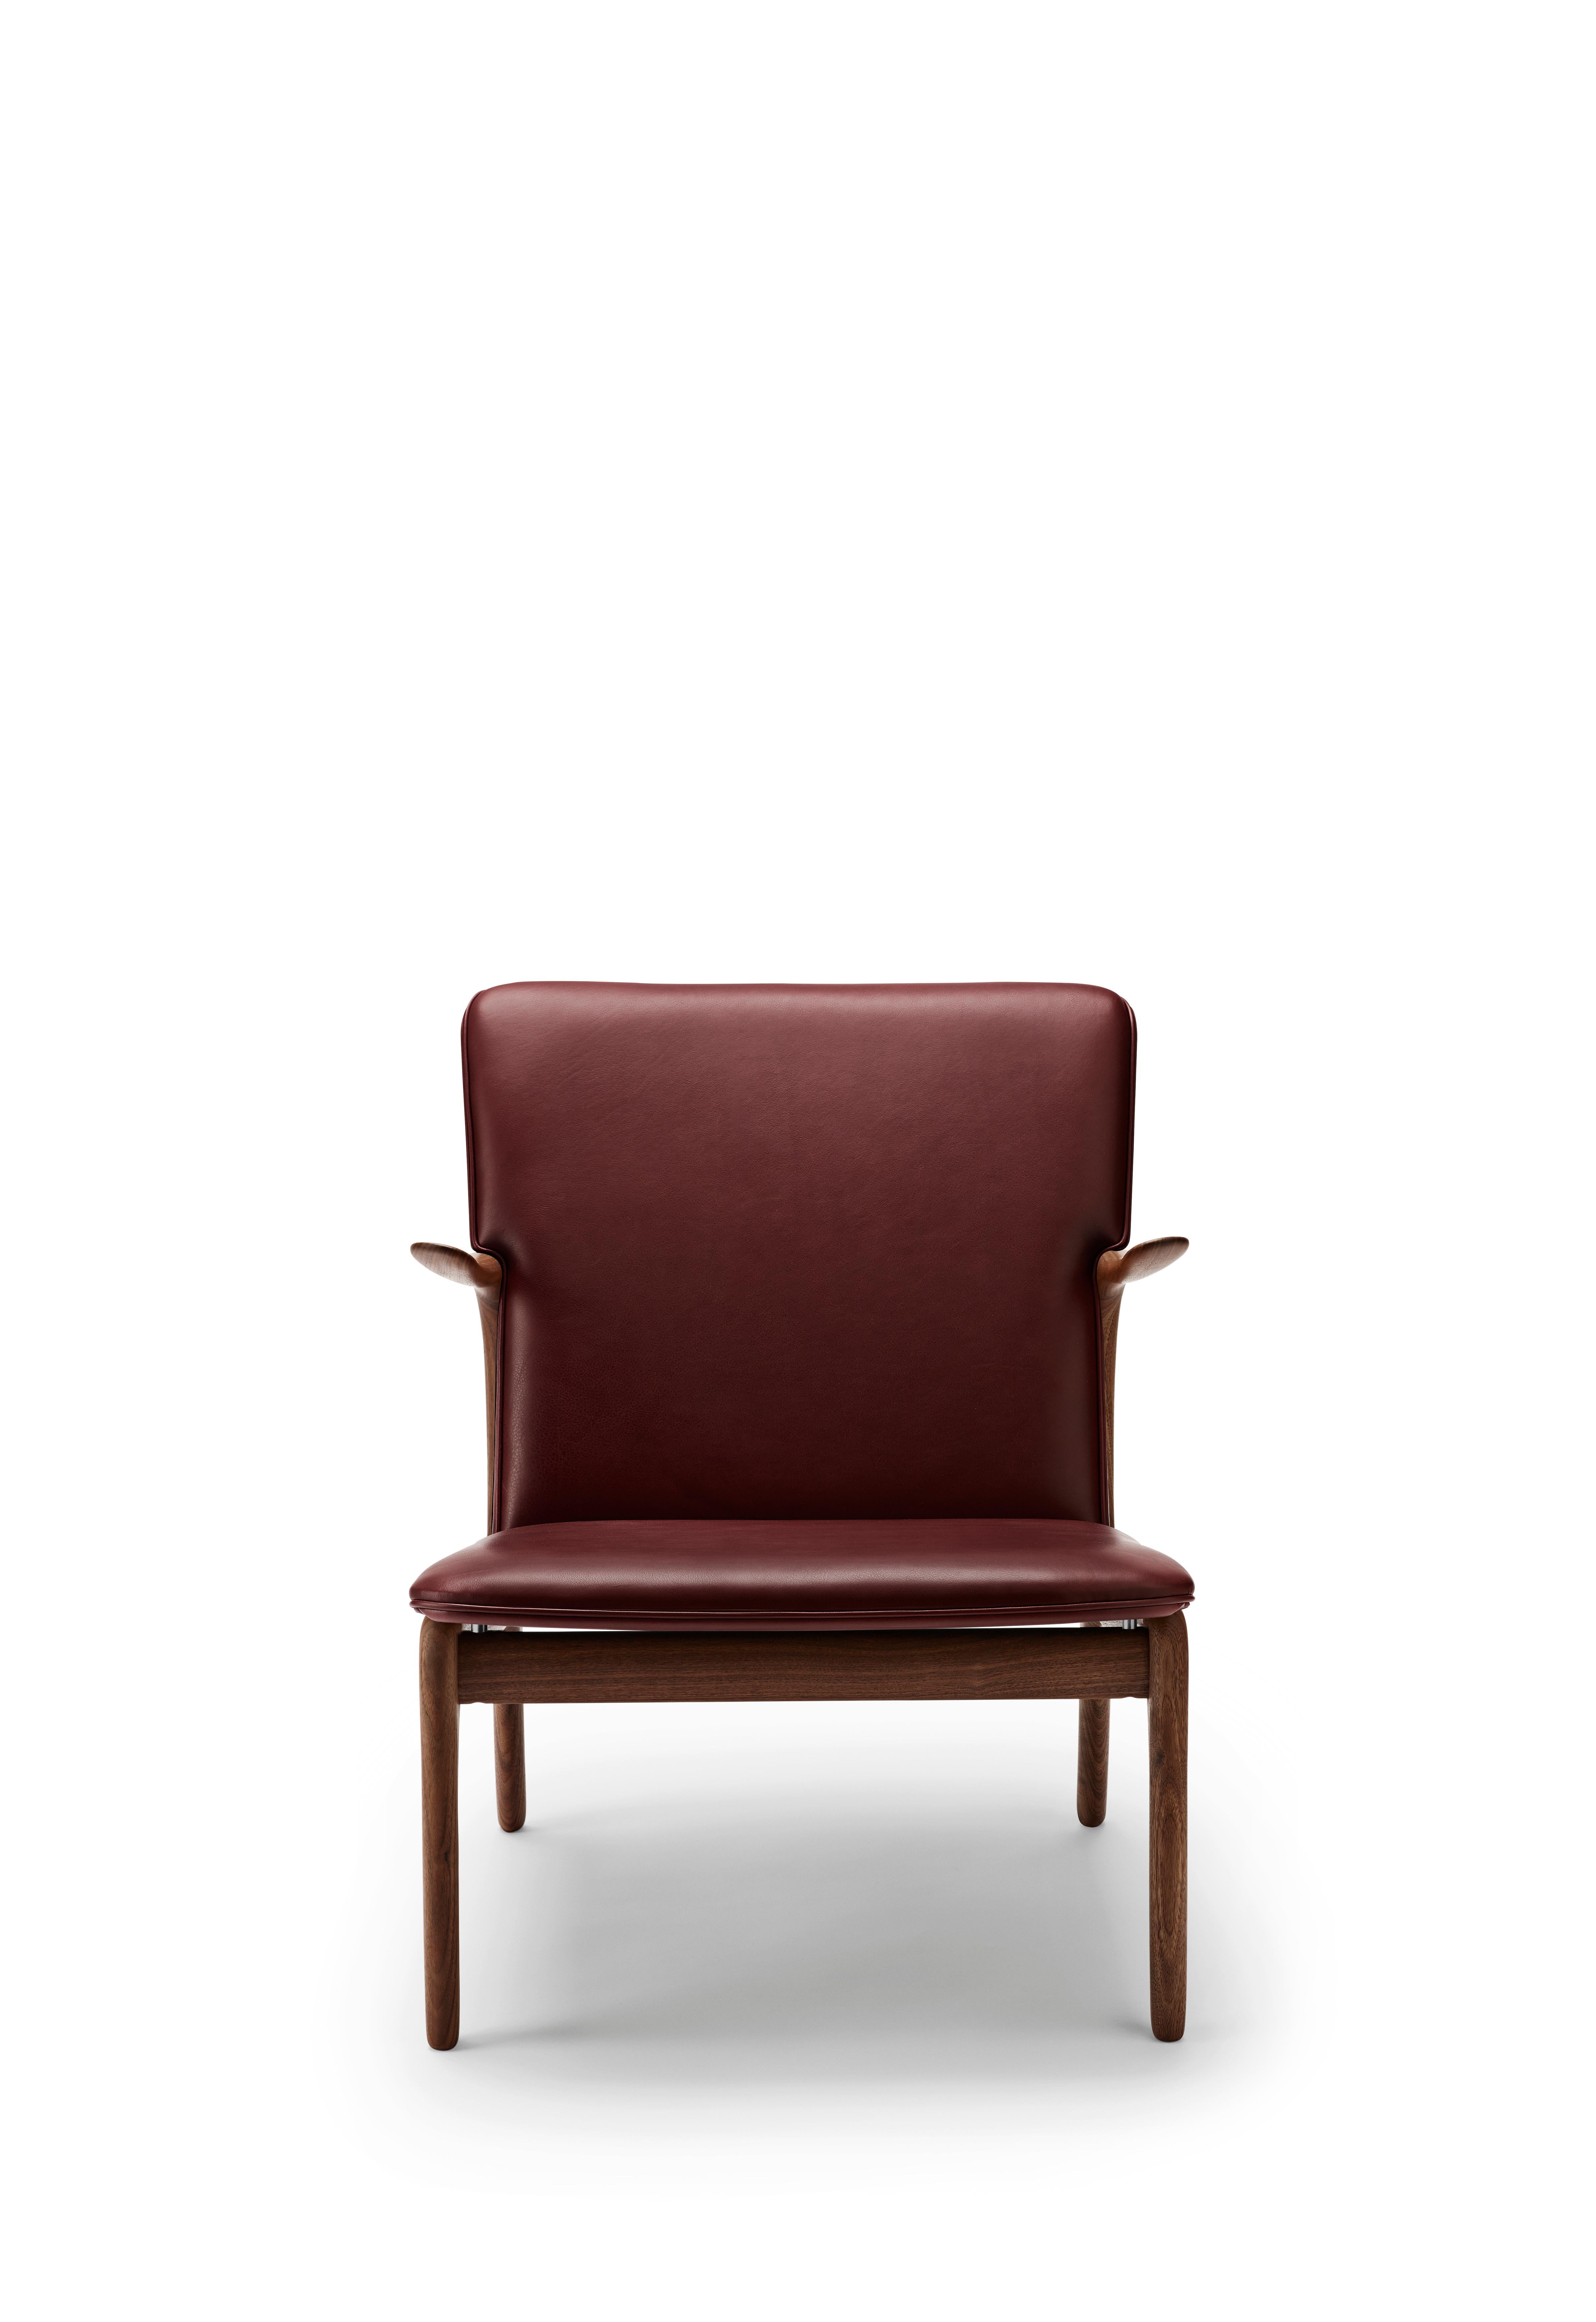 Red (Sif 93) OW124 Beak Chair in Walnut Oil by Ole Wanscher